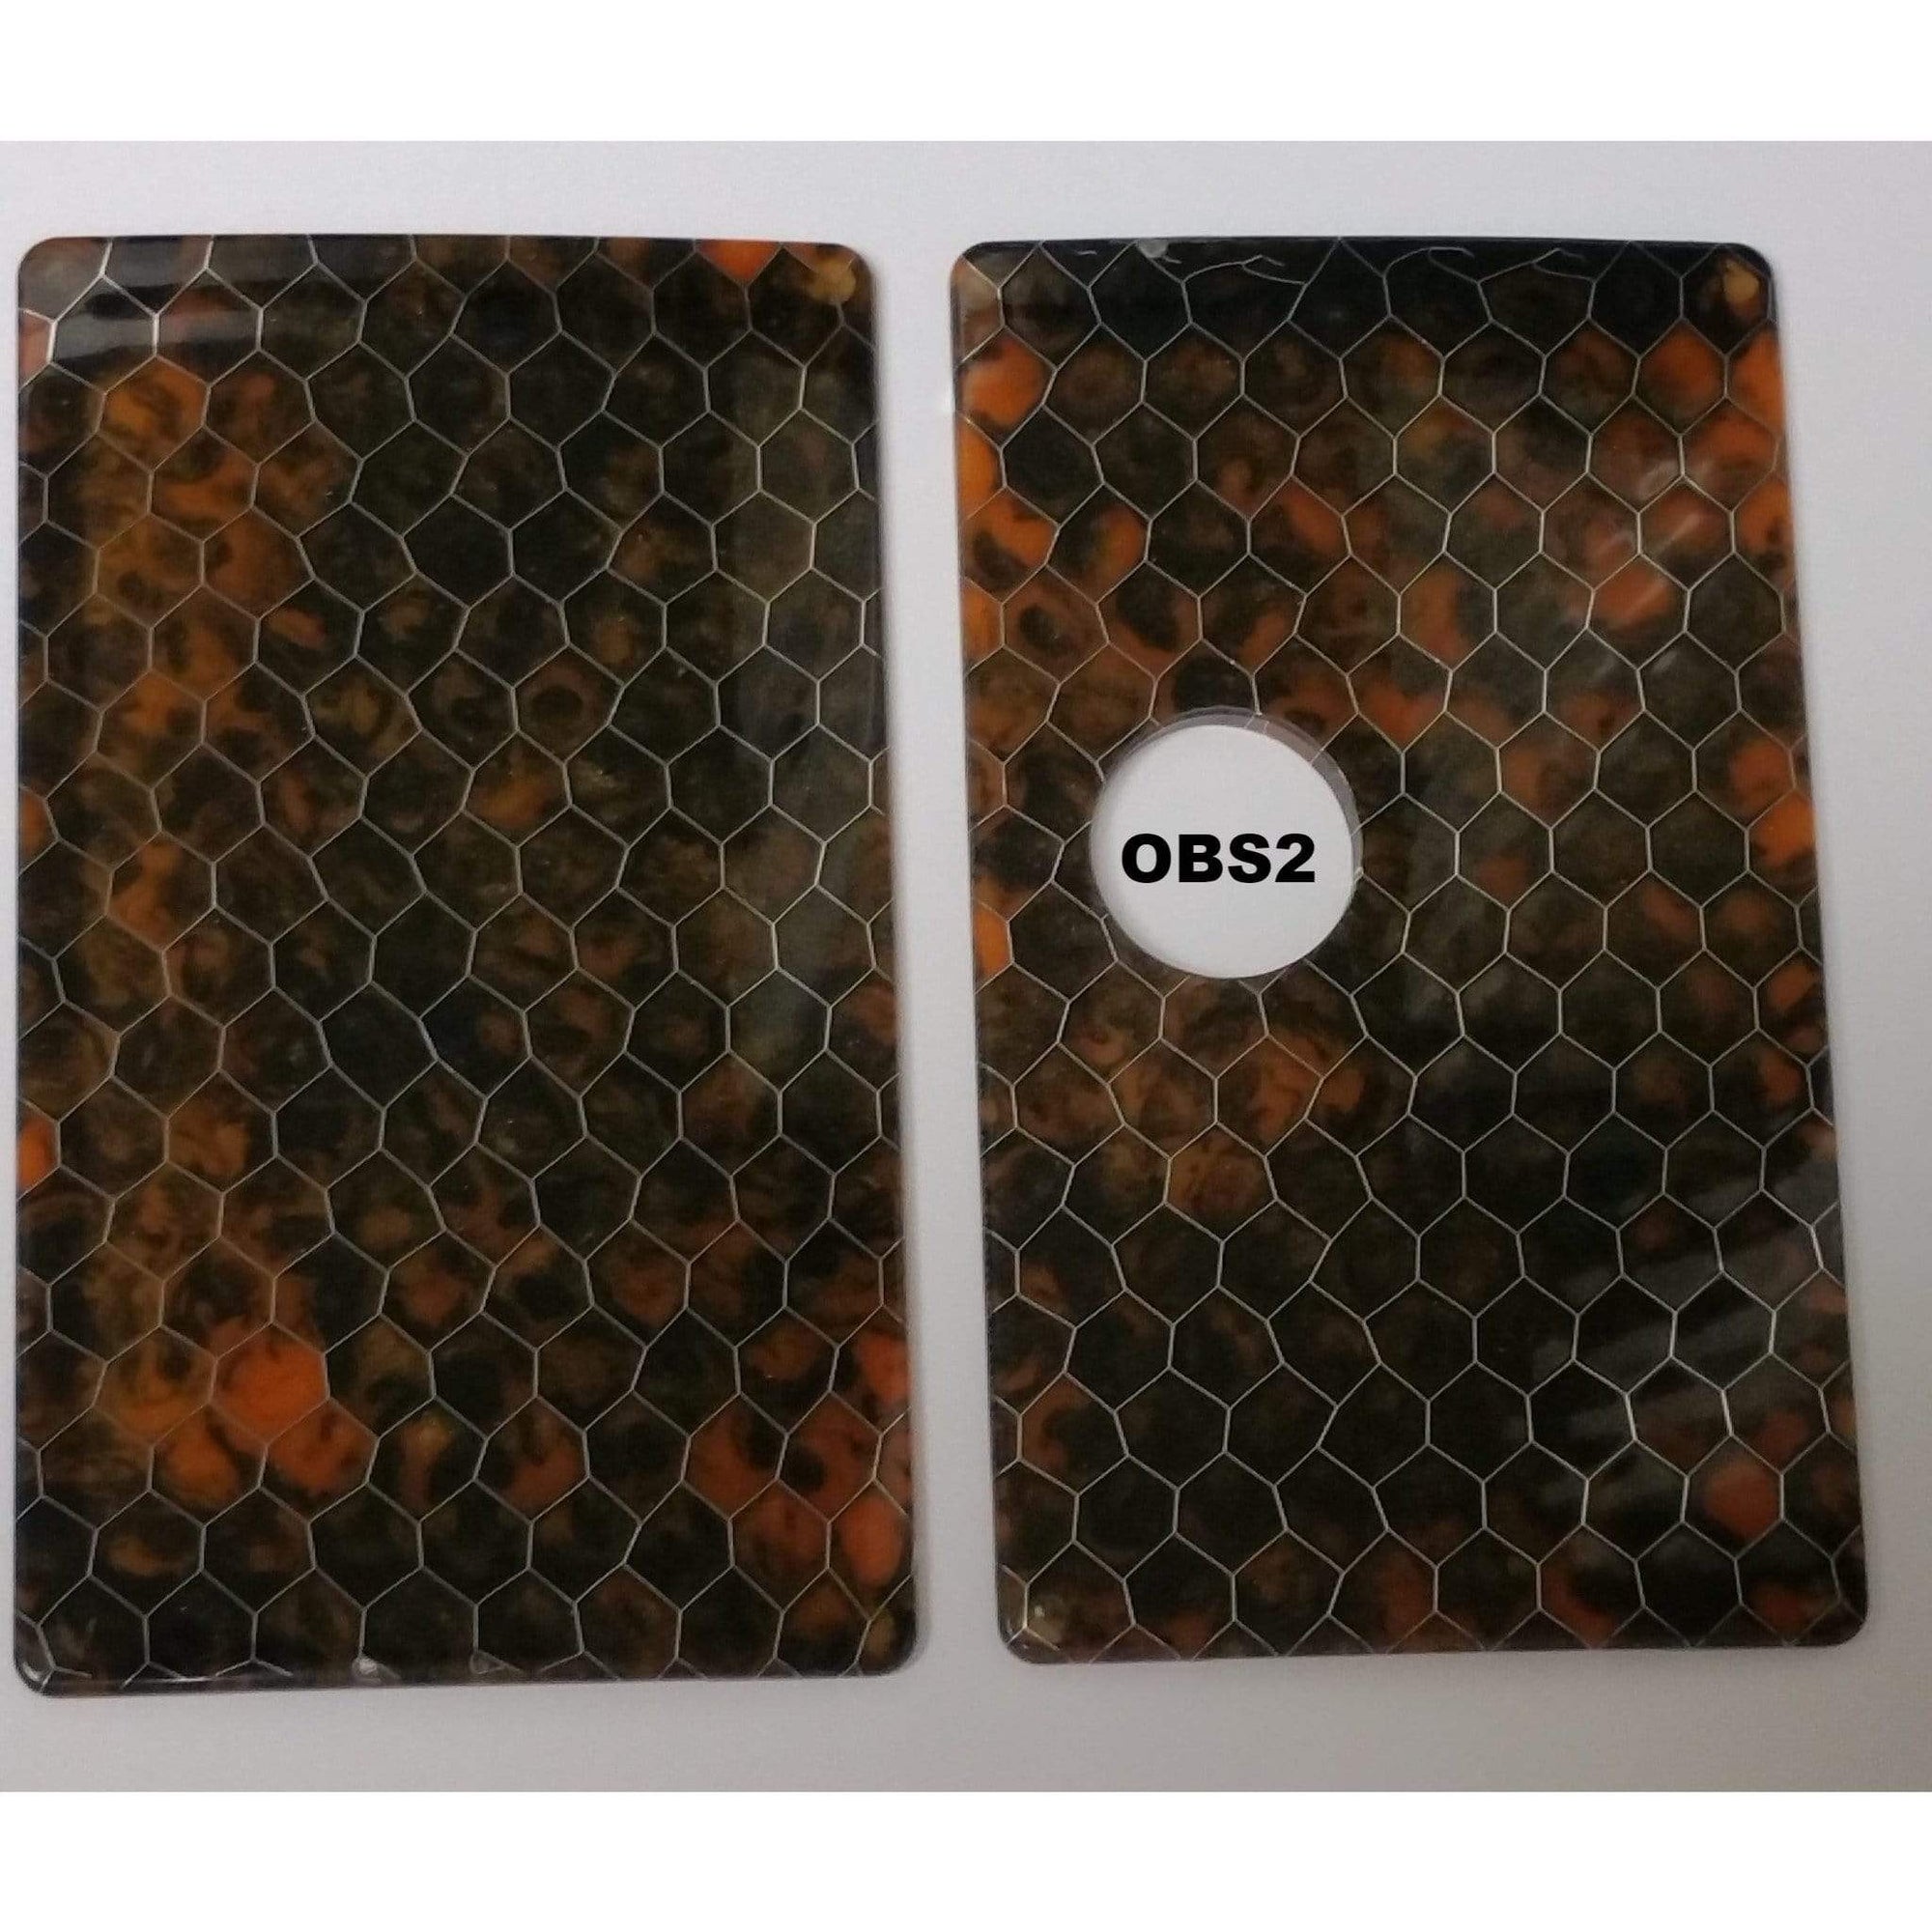 SXK Replacement Panel Cover for BB 60W/70W Mod Orange Black Scale #2 Misc Accessories